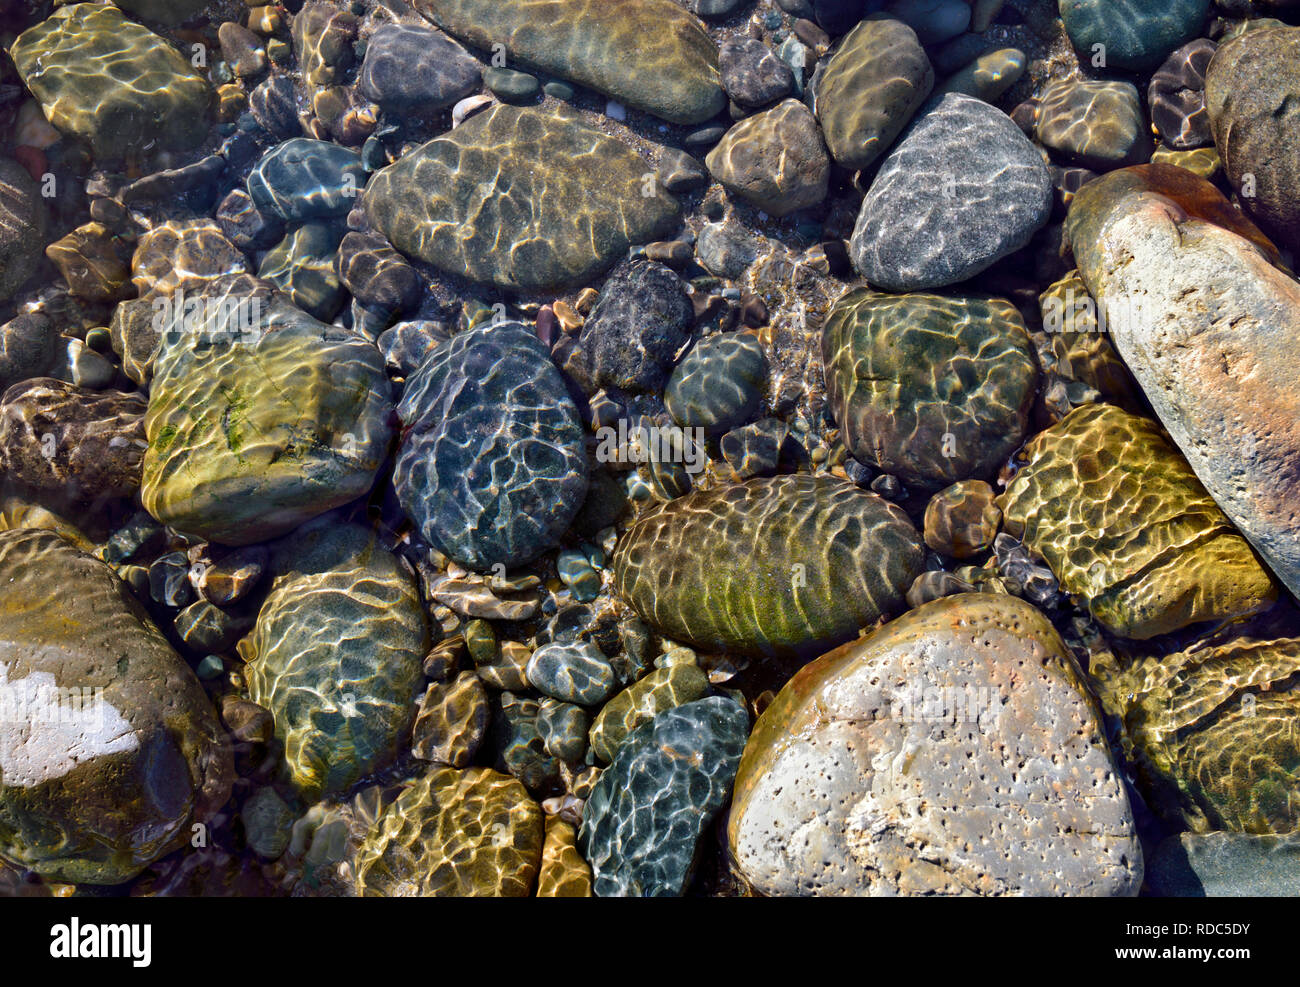 A close up view of submerged rocks in a rock pool on Barmouth Beach, Wales. Stock Photo